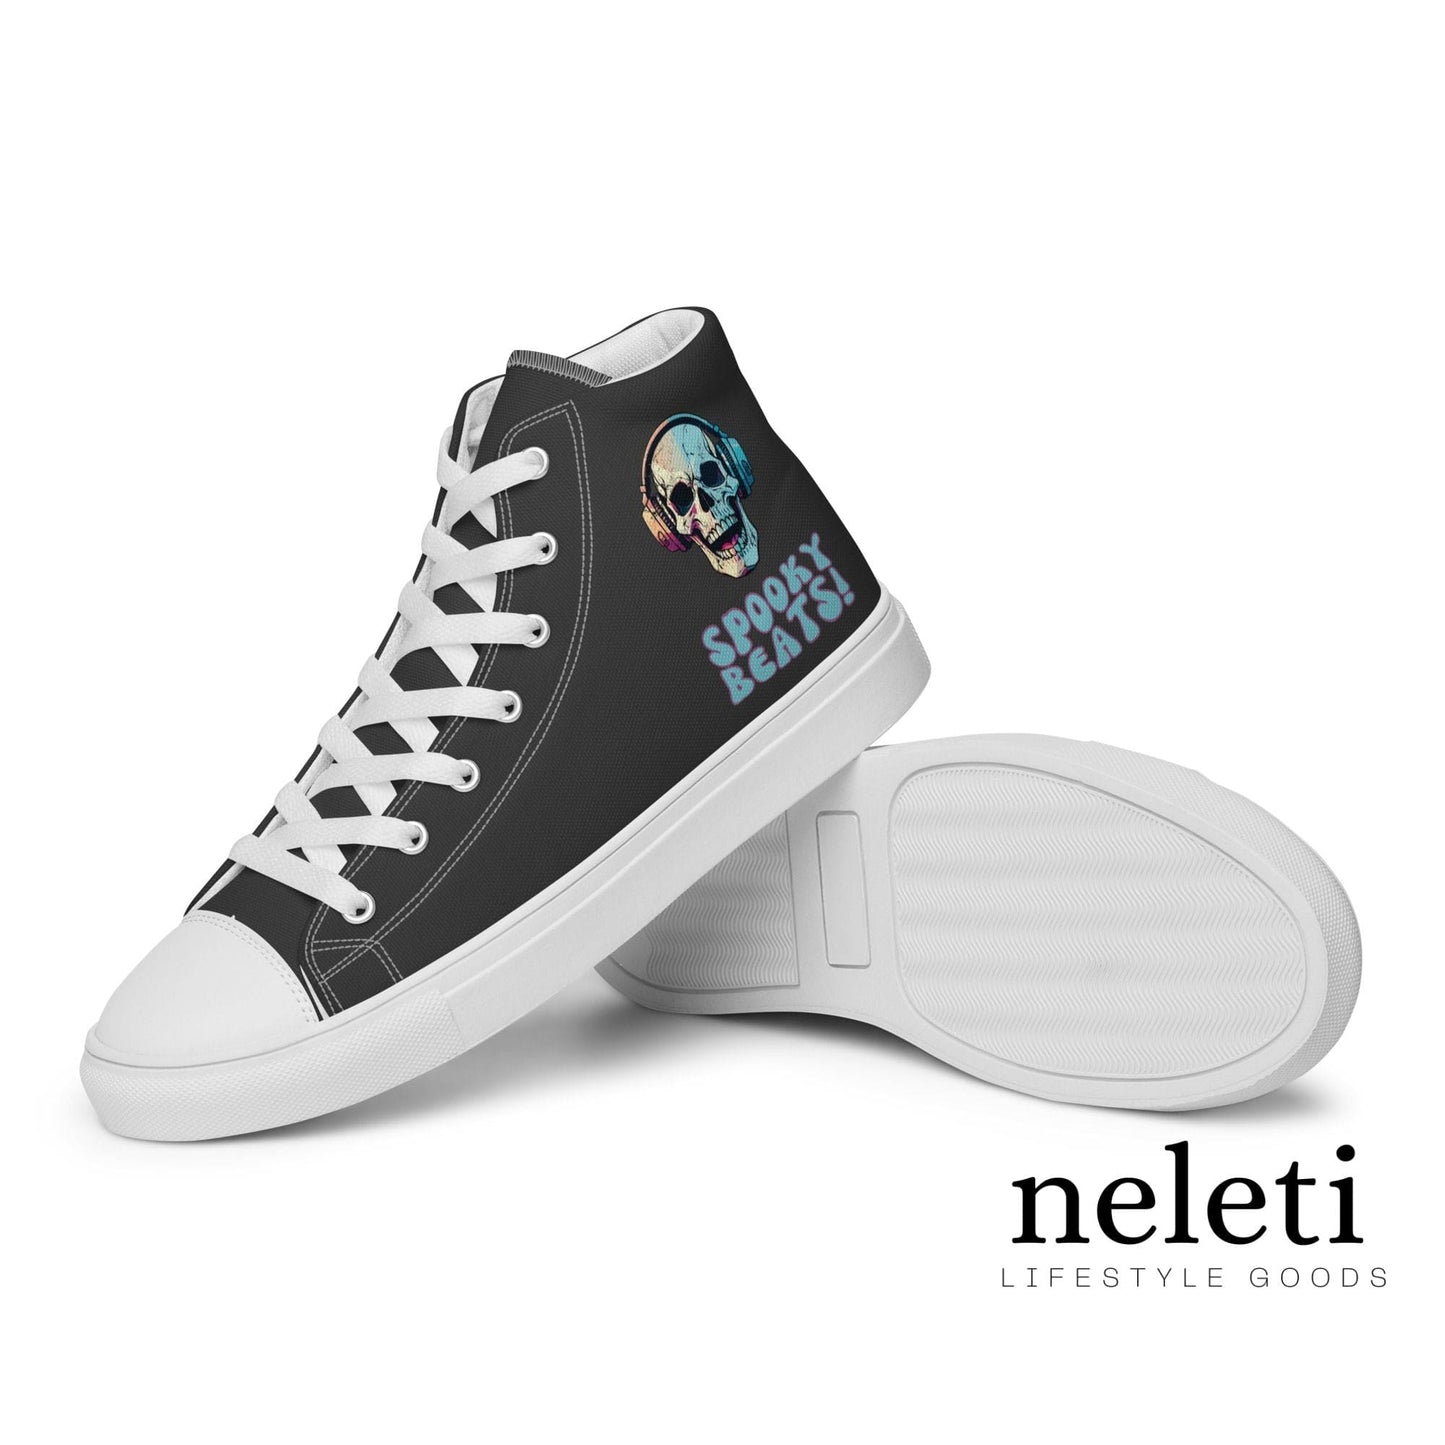 Black High Top Canvas Shoes with Skull Motif for Men